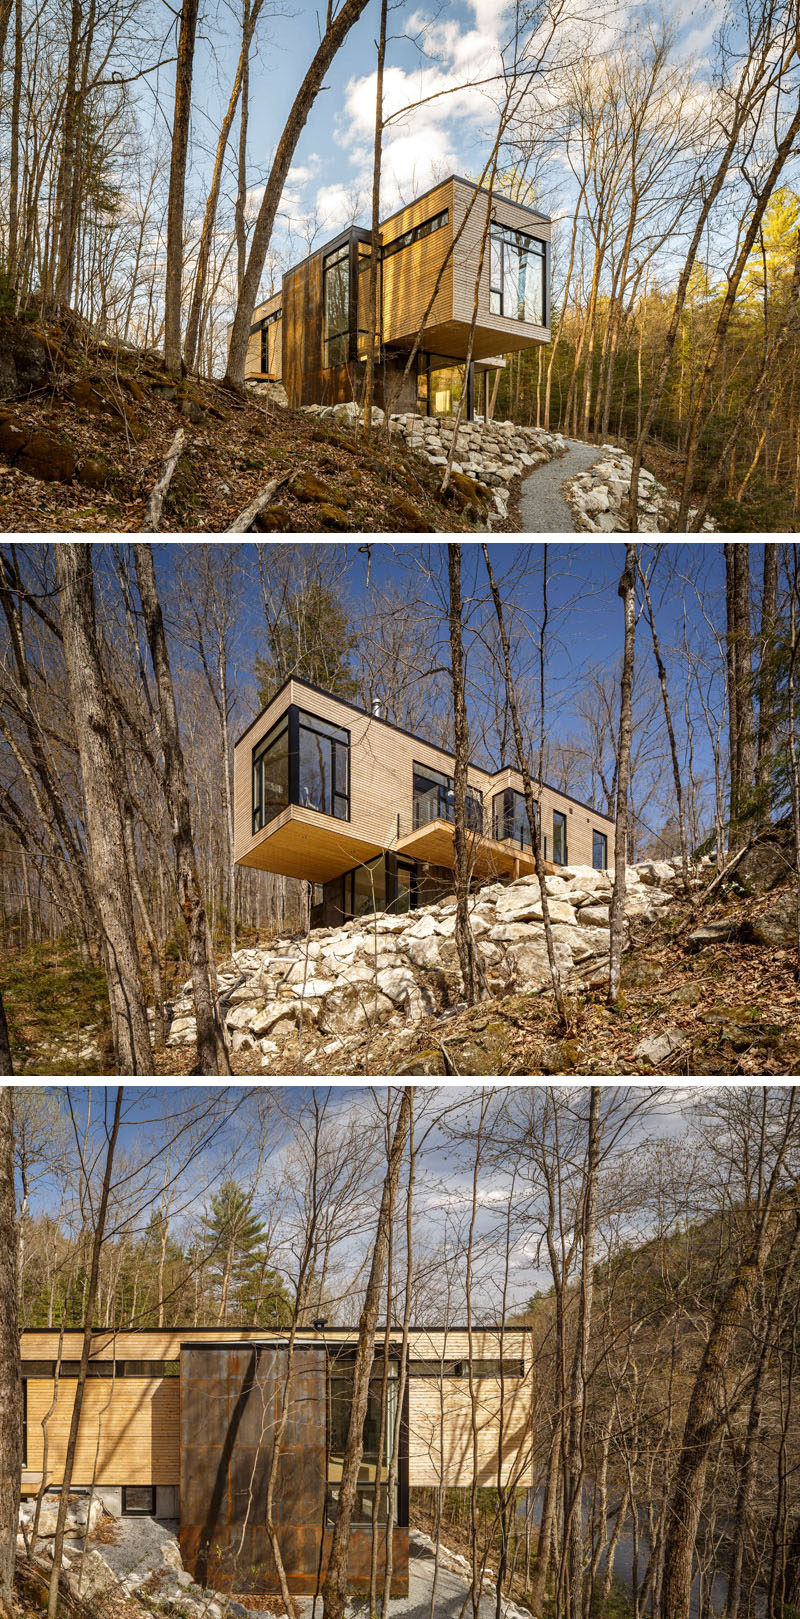 18 Modern House In The Forest // The trees of the forest around this house help filter the natural light that streams into the home.